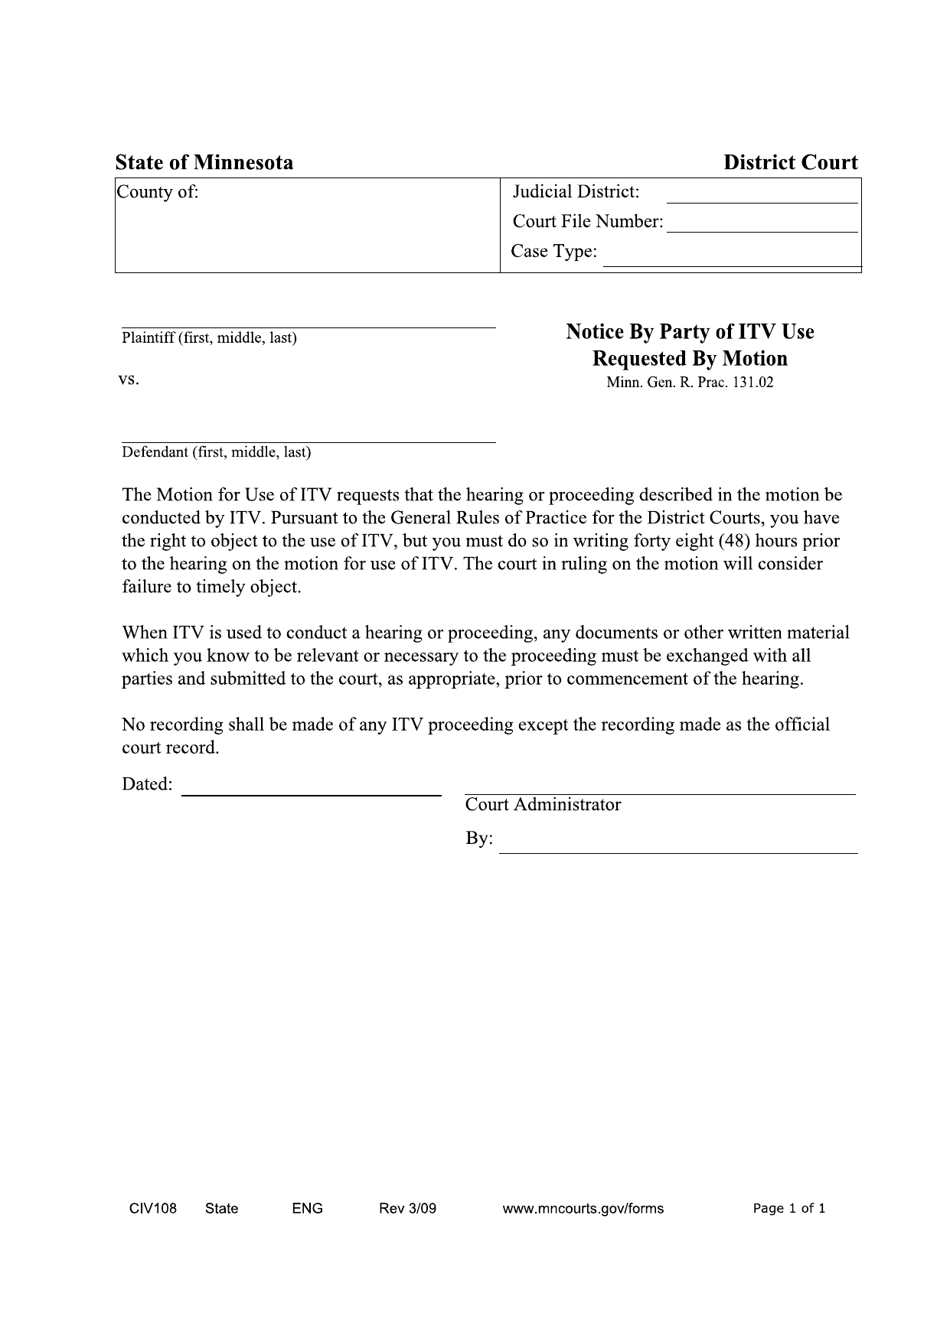 Form CIV108 Notice by Party of Itv Use Requested by Motion - Minnesota, Page 1